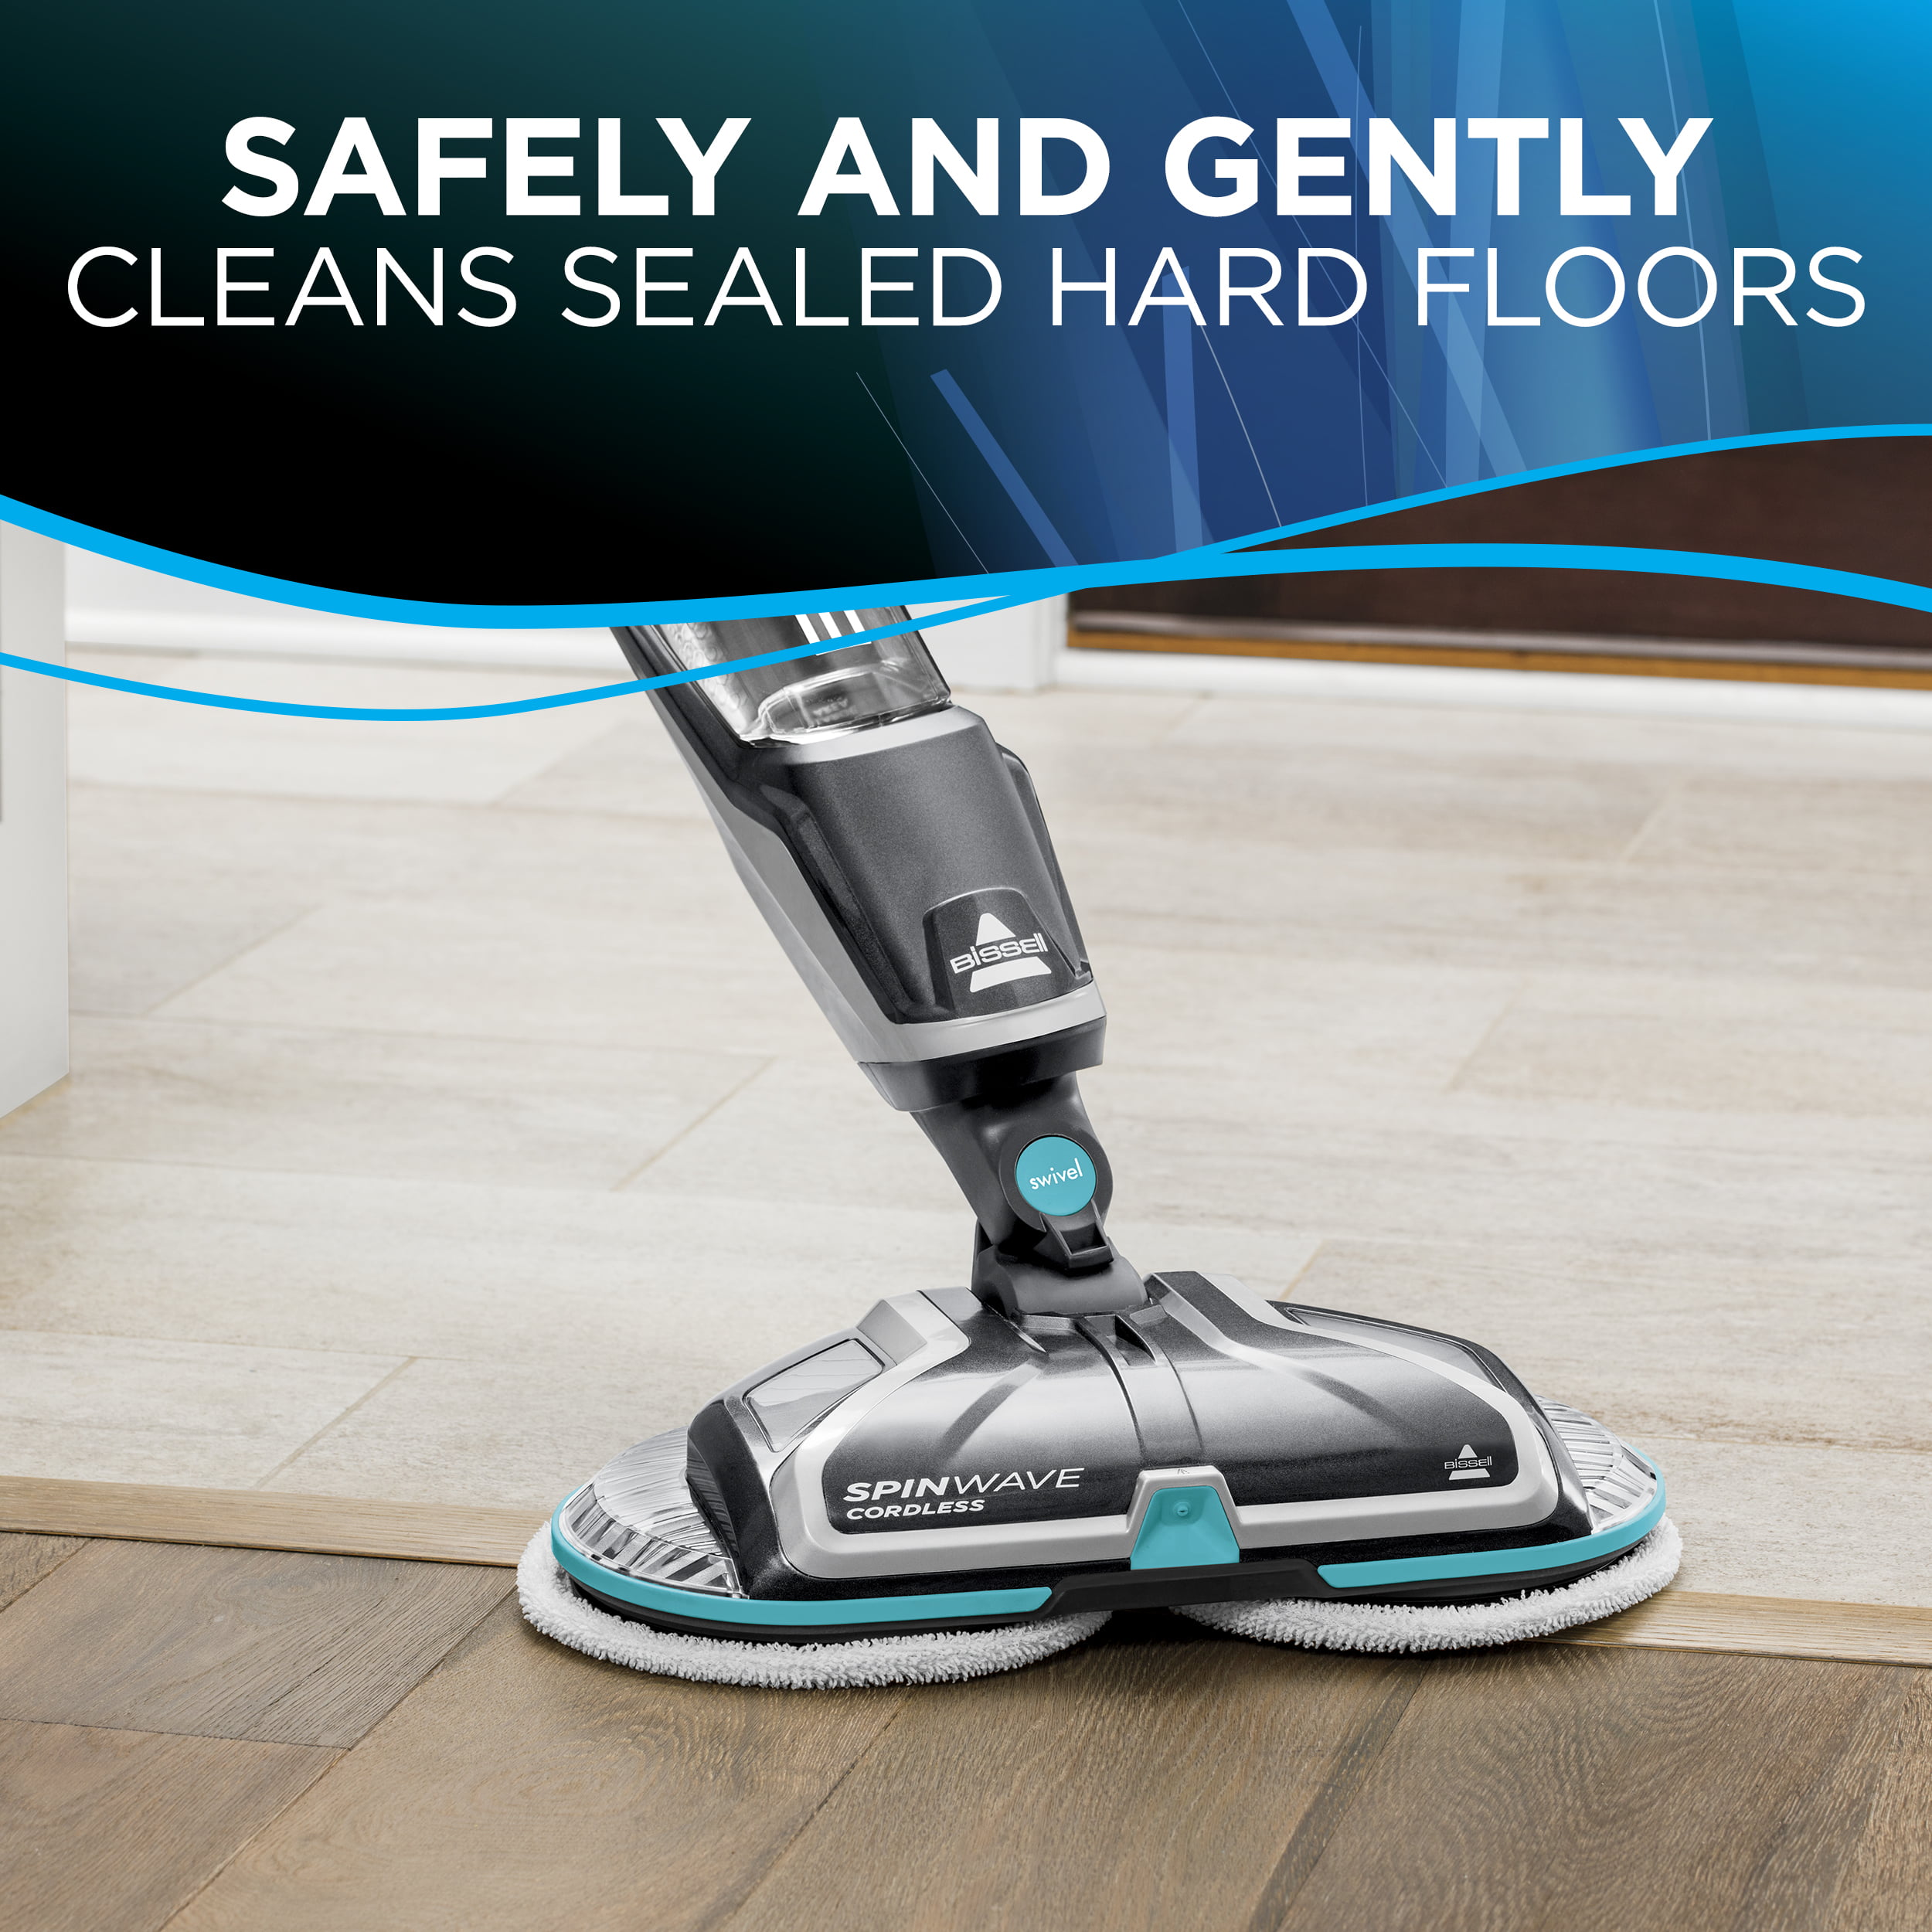 Spinwave 2315A Cordless BISSELL Powered Floor Spin Cleaner, Hard and Mop